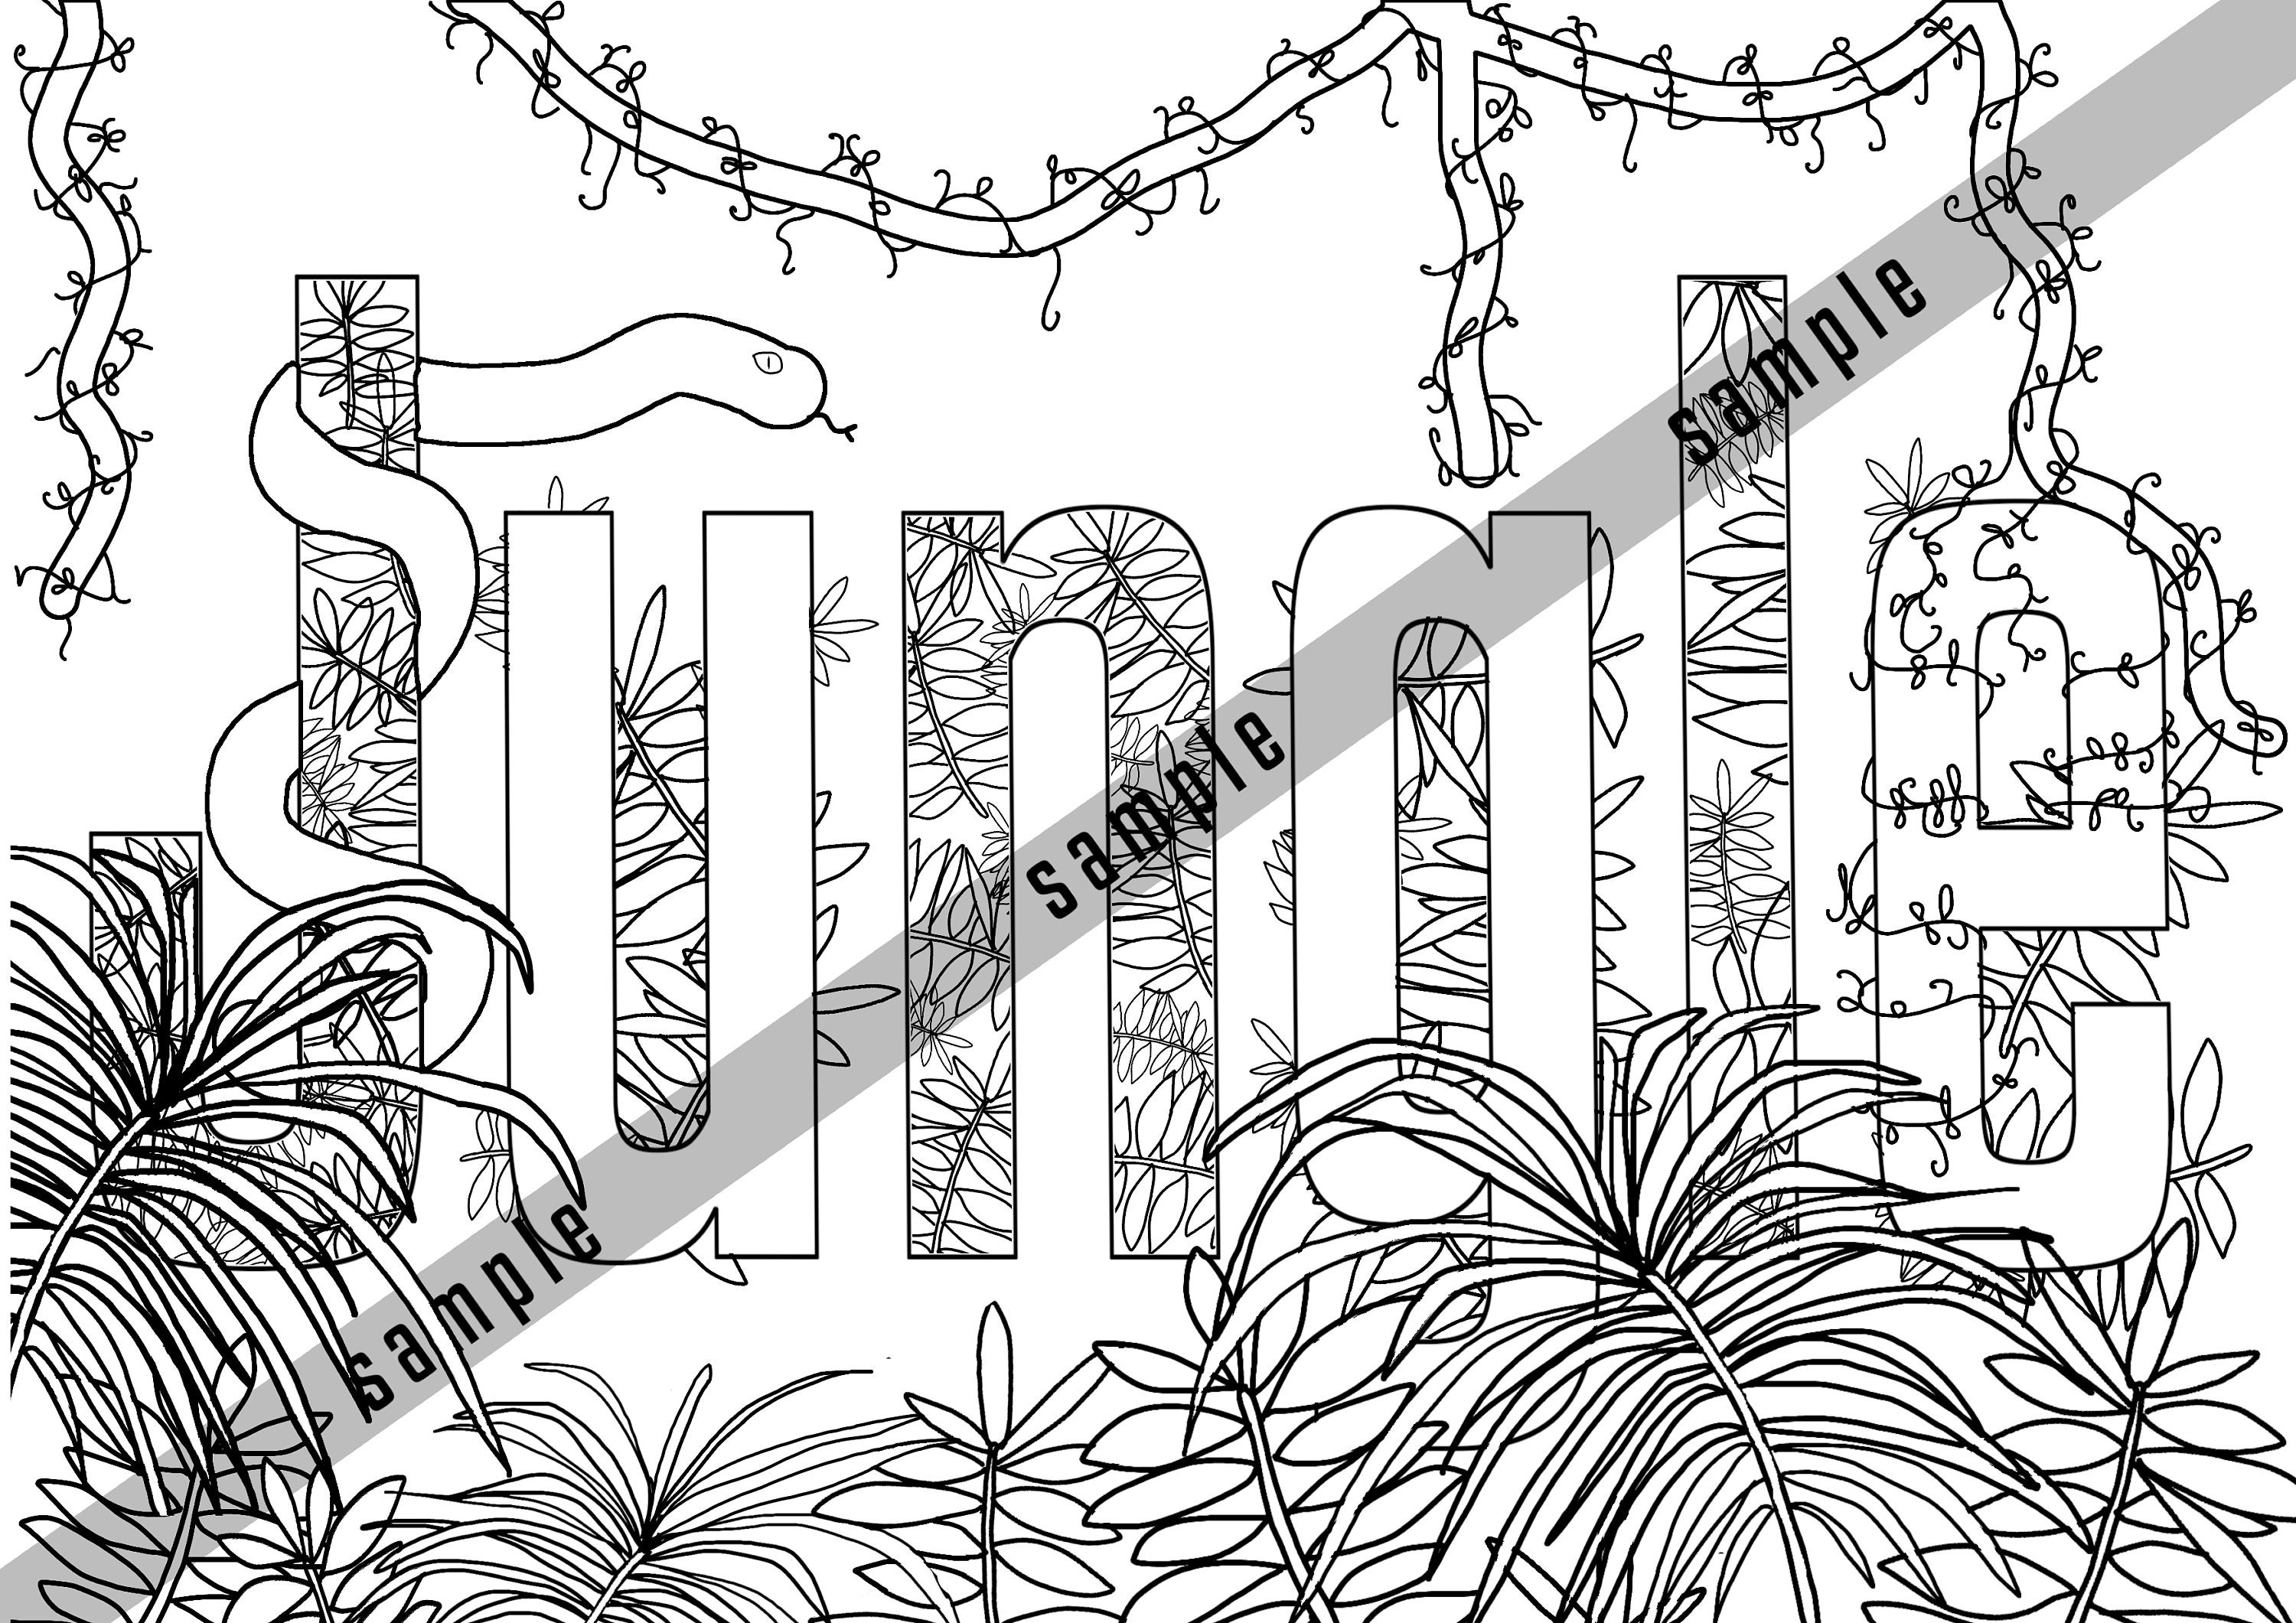 Jungle Colouring Page Digital Copy | Etsy